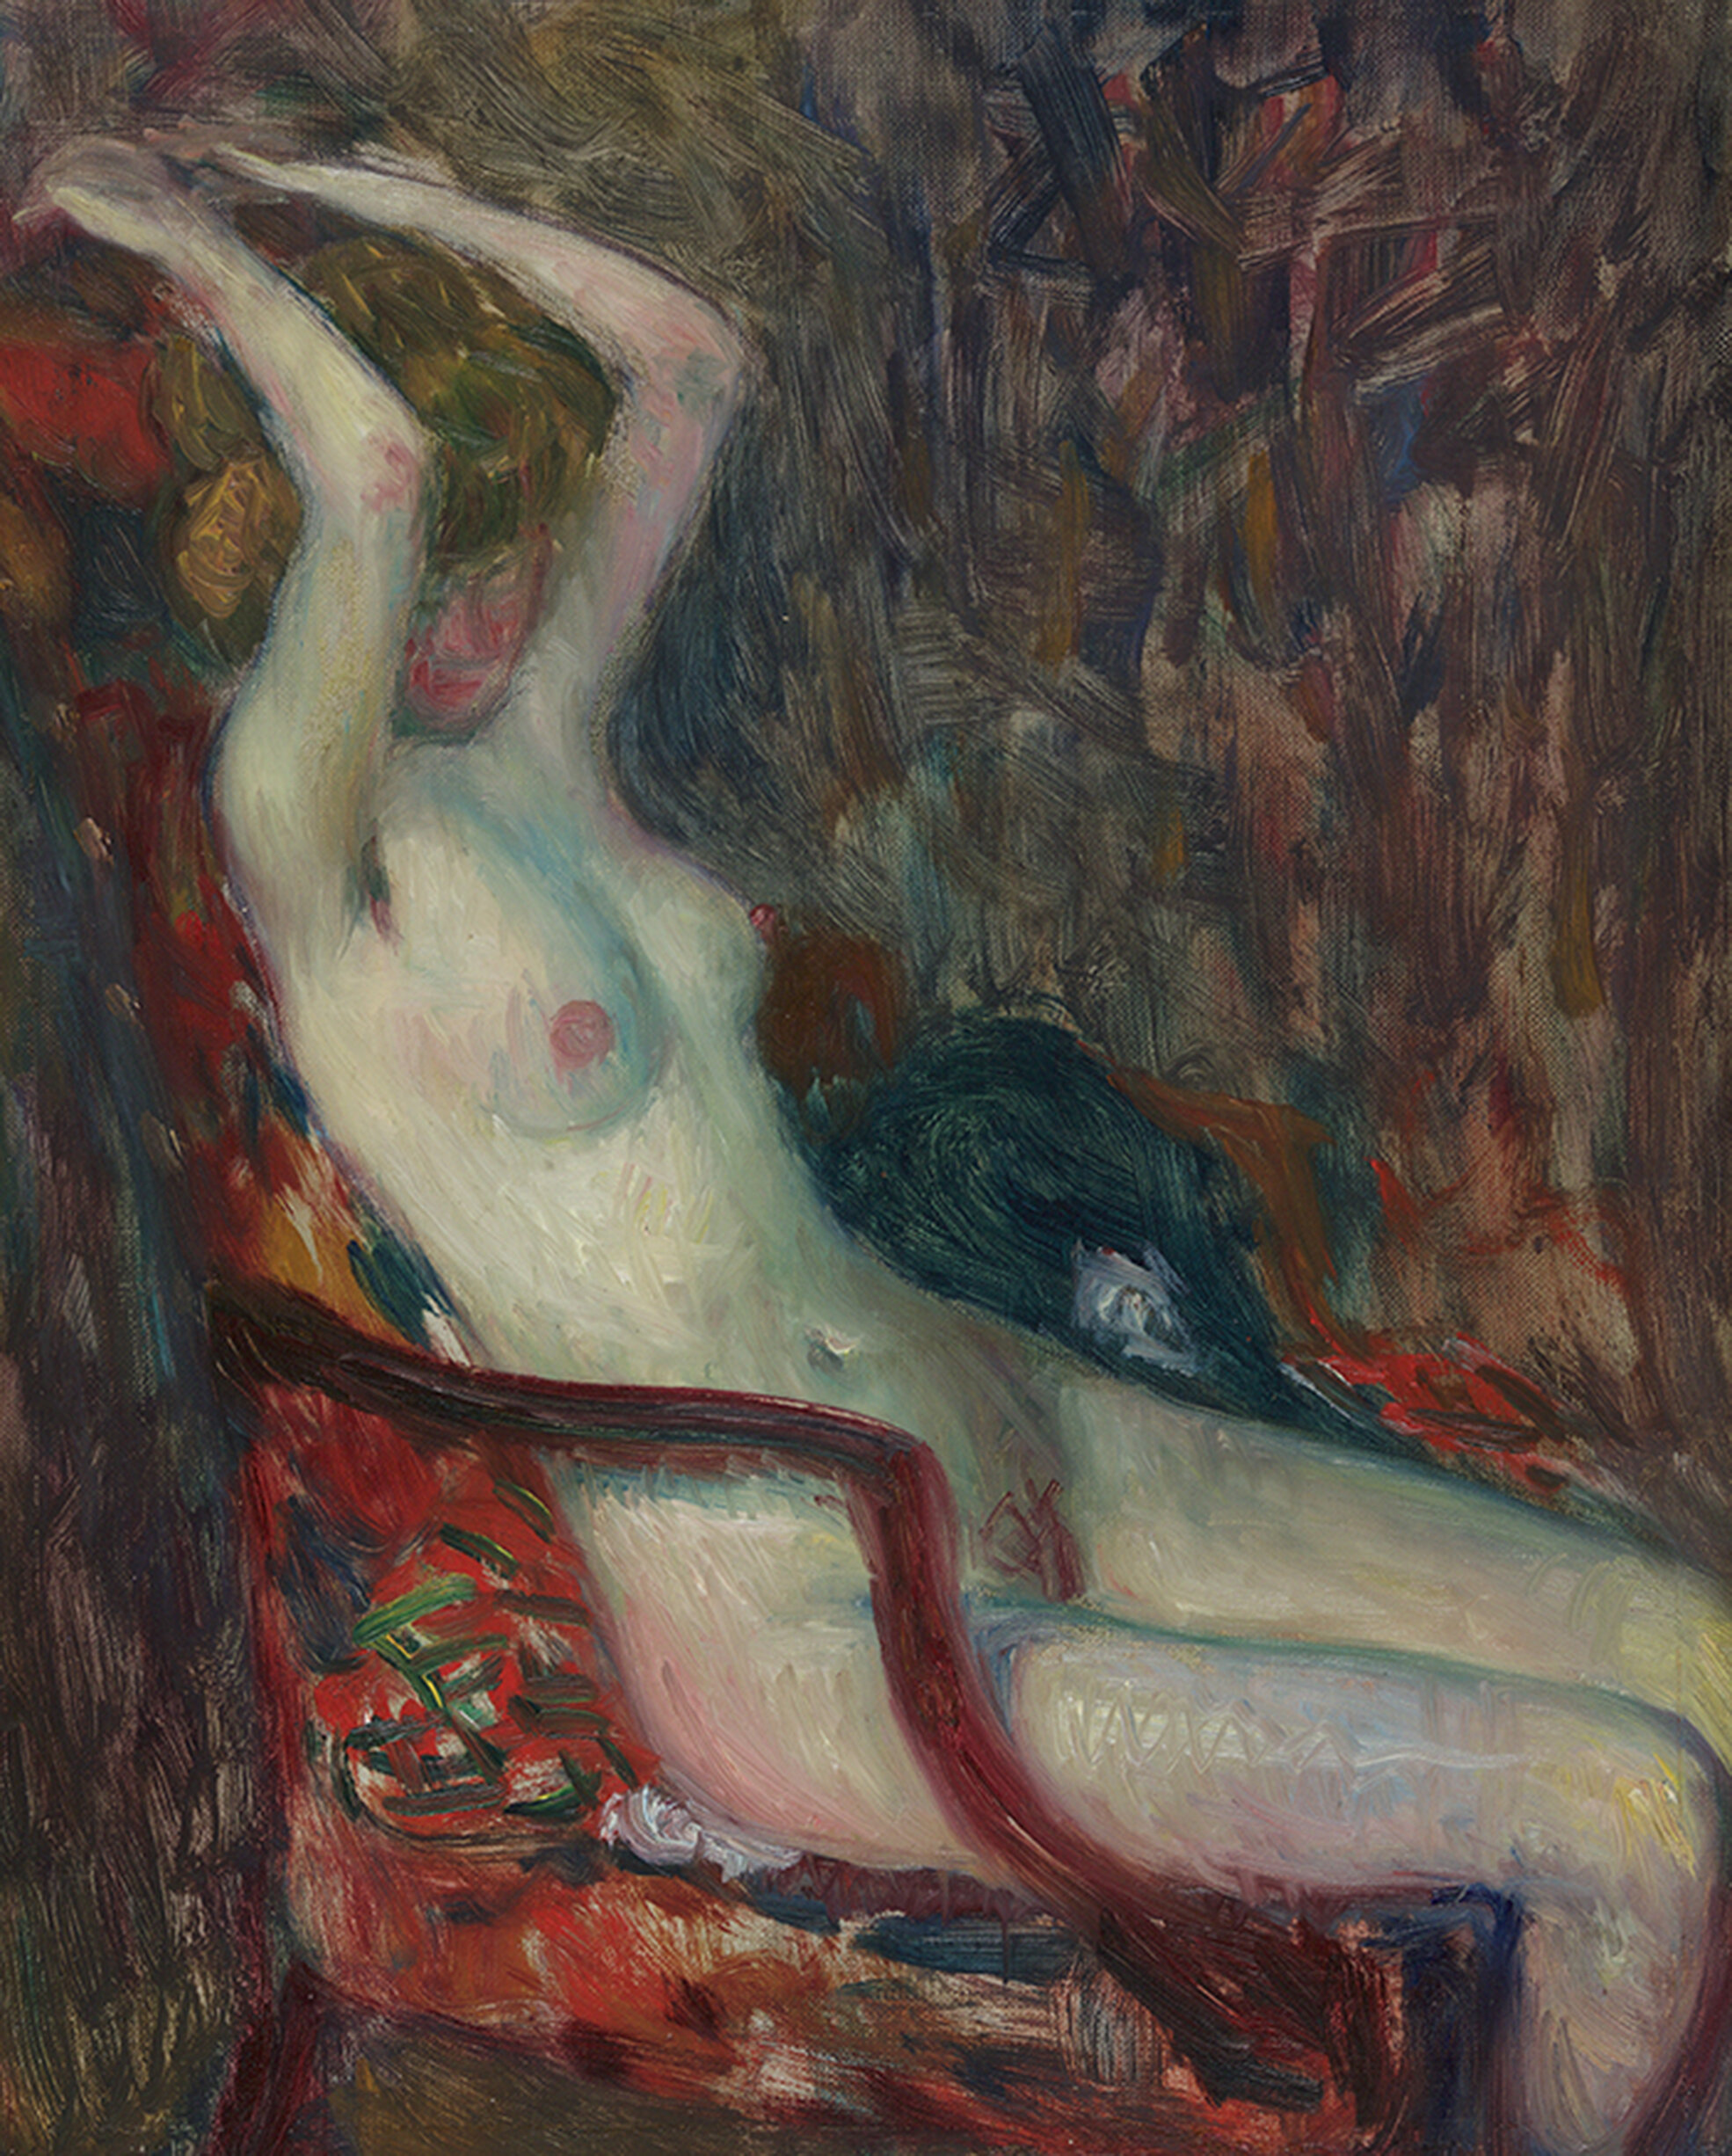 Painting of nude woman sitting on a chair with arms over her head